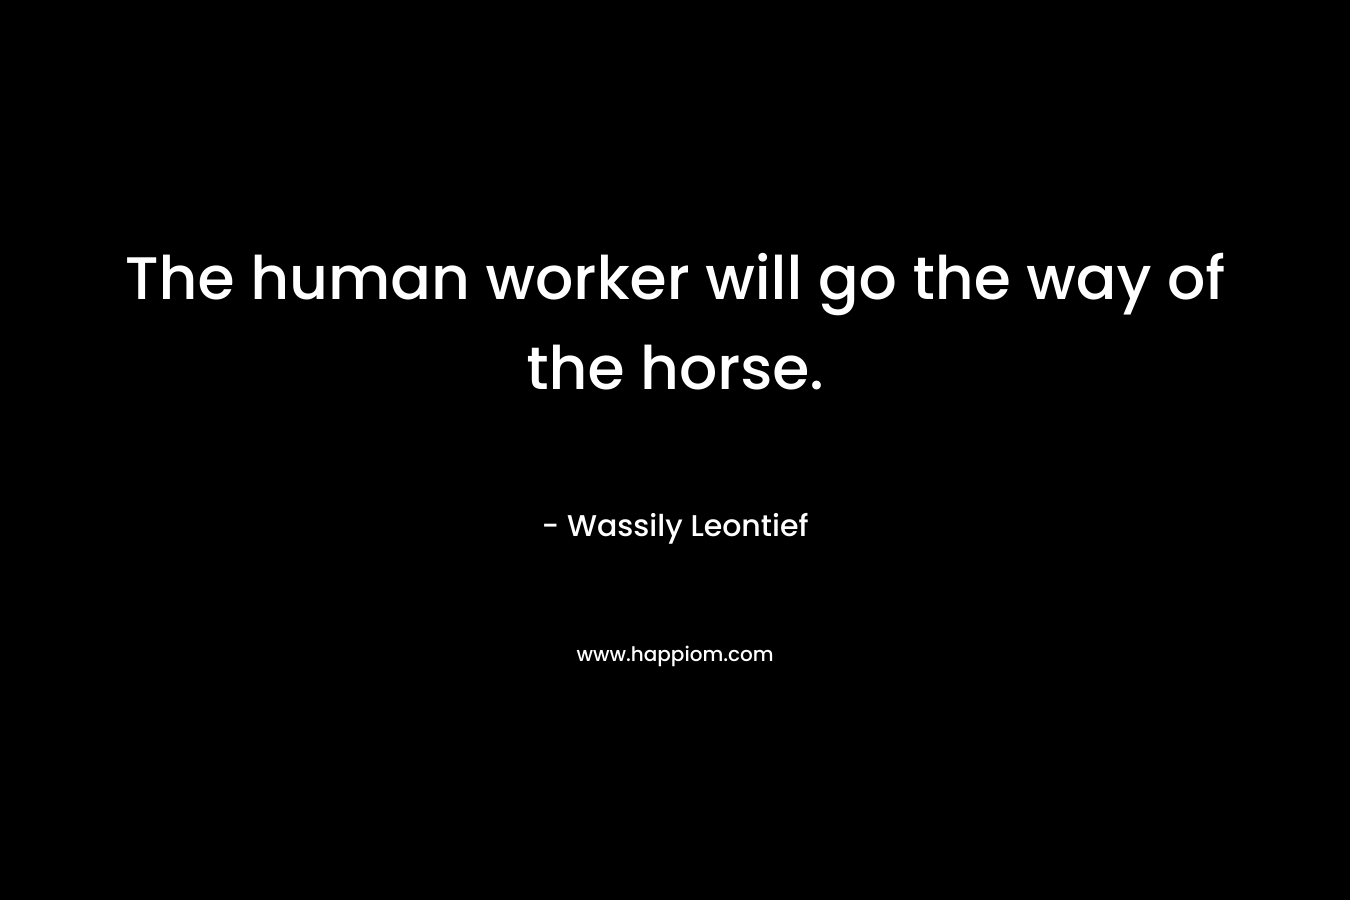 The human worker will go the way of the horse.